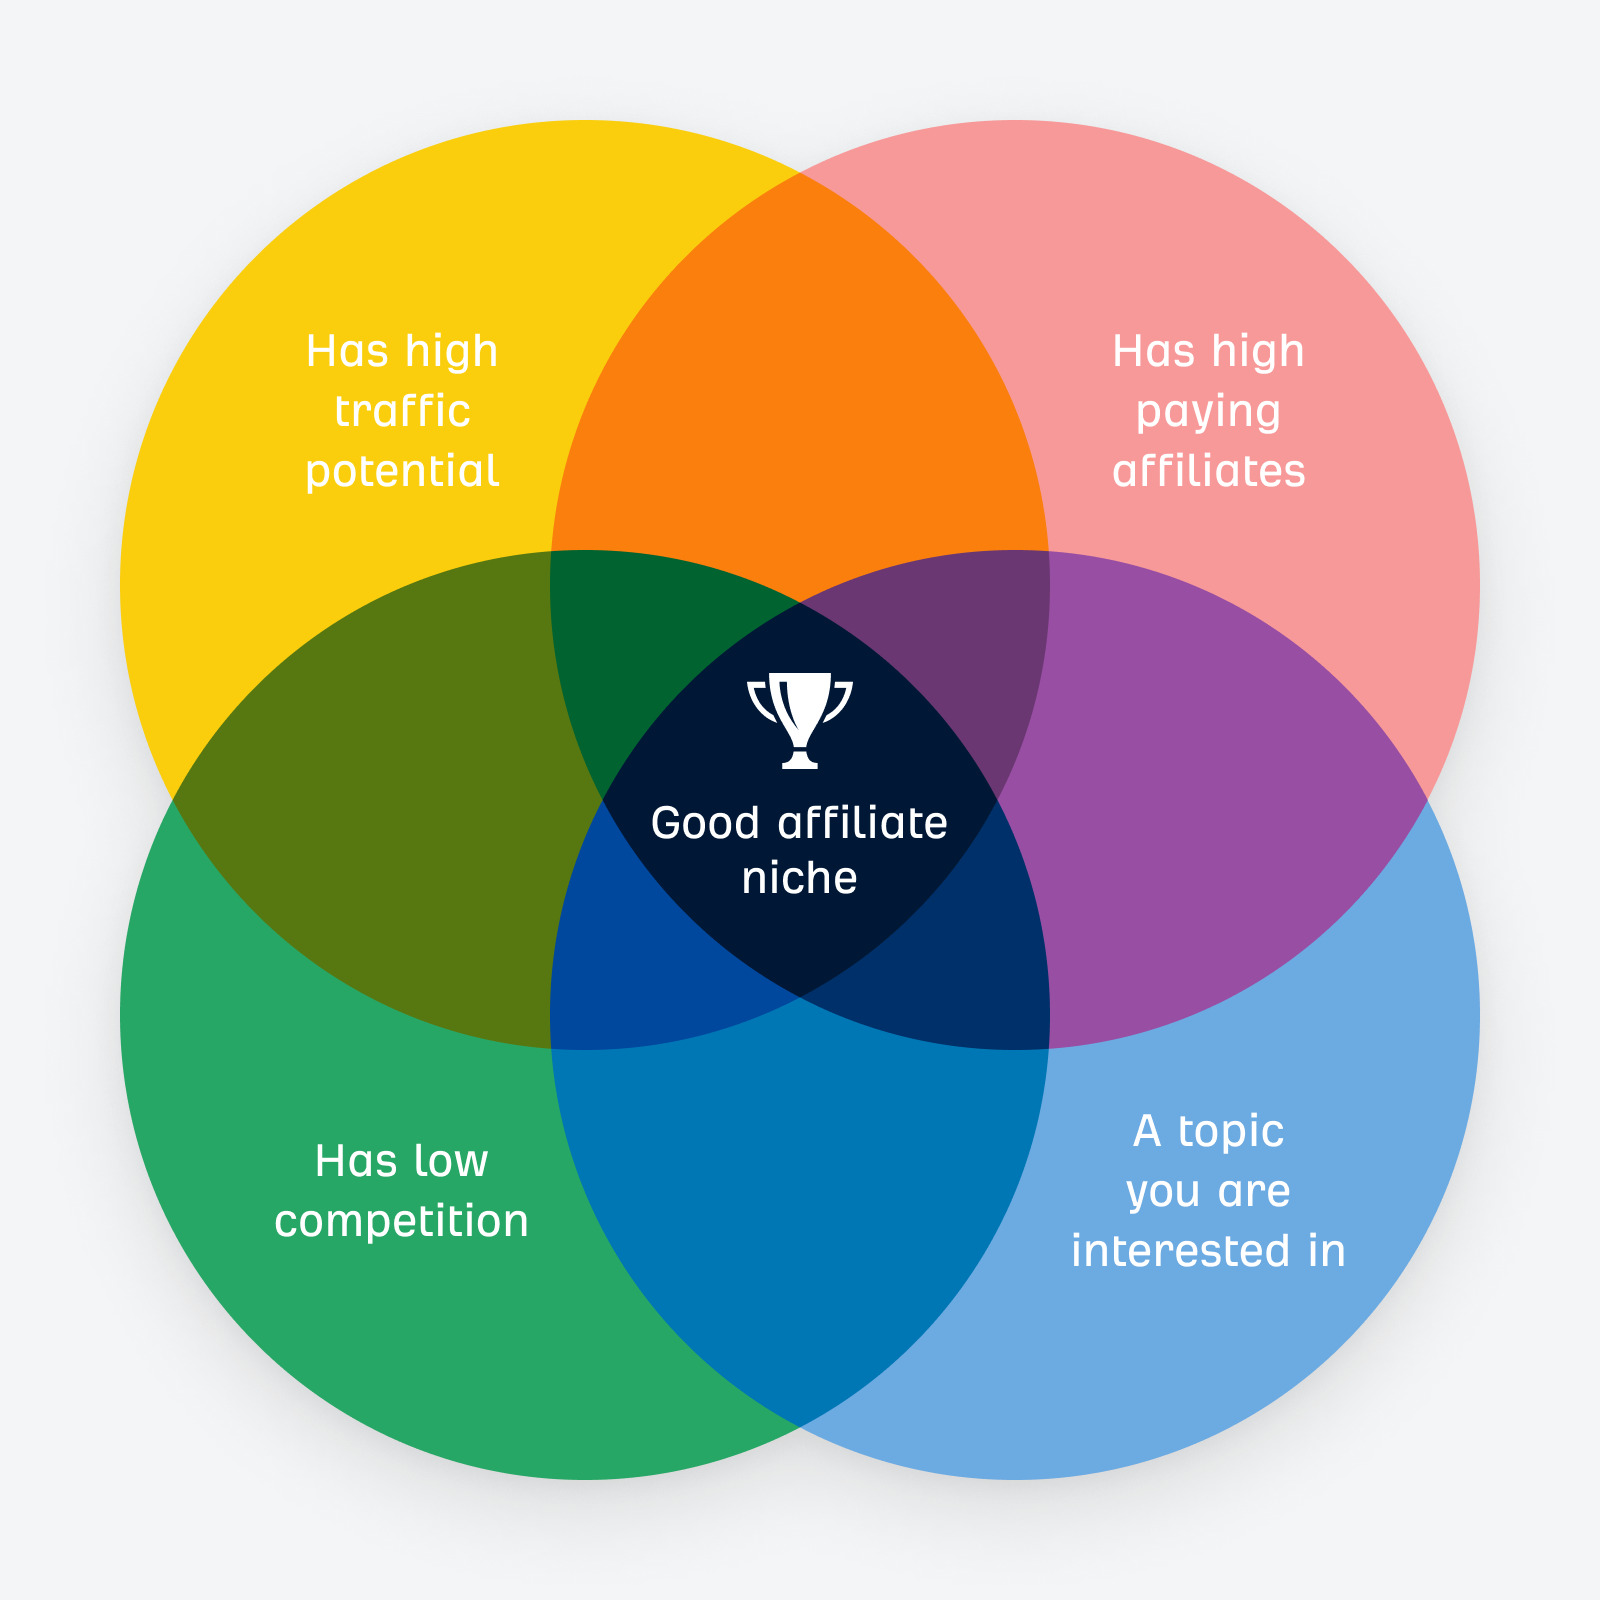 Illustration: What makes a good affiliate niche